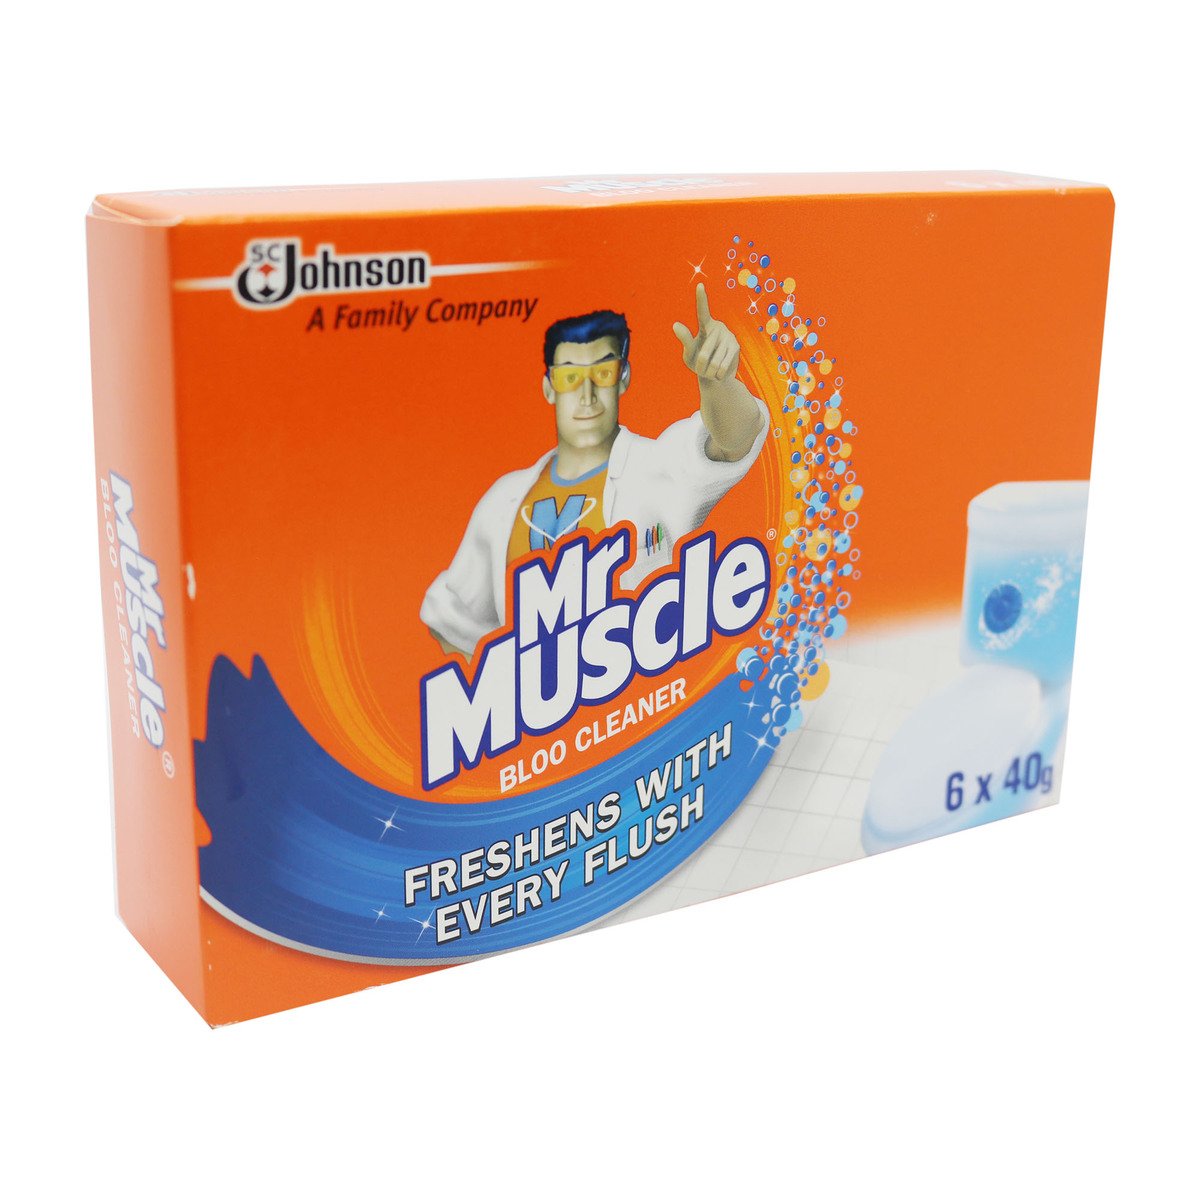 Mr Muscle Bowl Toilet Bloo Cleaner 6 x 40g